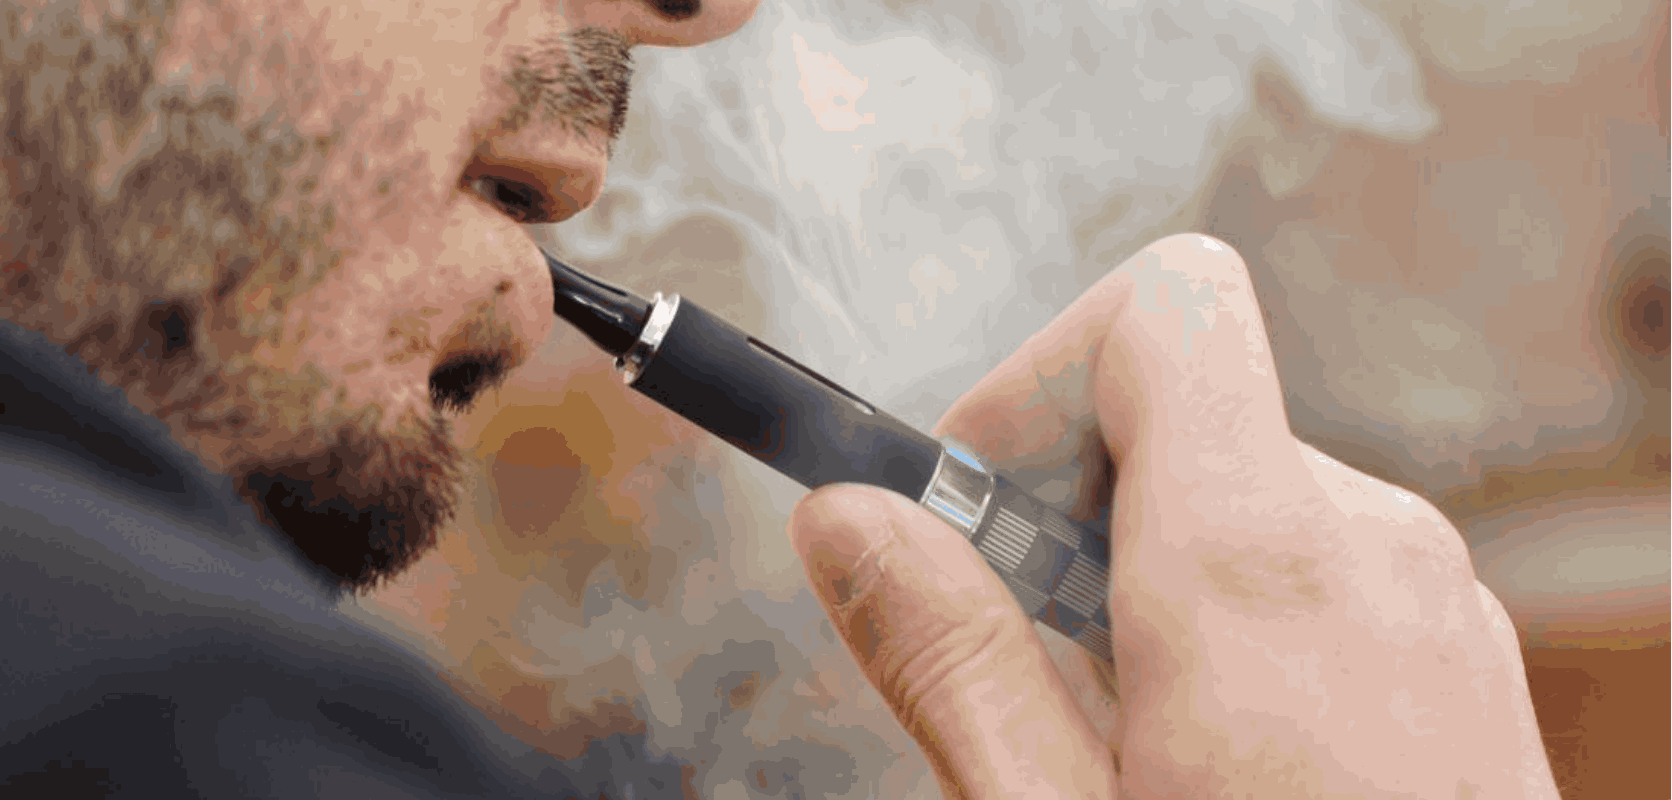 You've purchased your first THC pen kit. Congratulations! But how do you use it? Follow these simple instructions to learn how to use a vape kit in minutes.